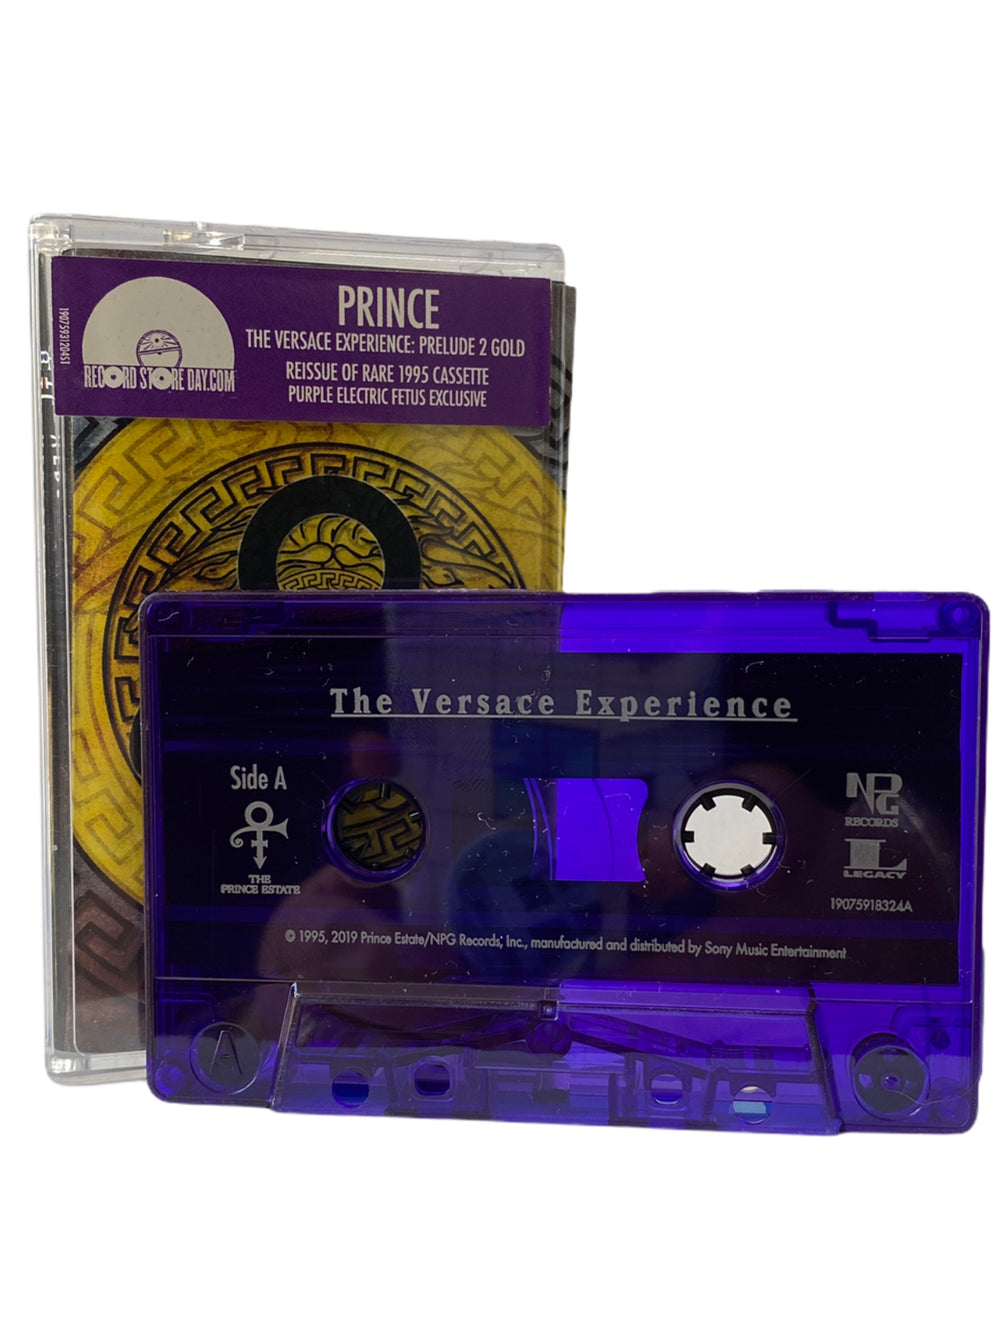 Prince – The Versace Experience Tape Cassette Album Release Sony Legacy PURPLE ED